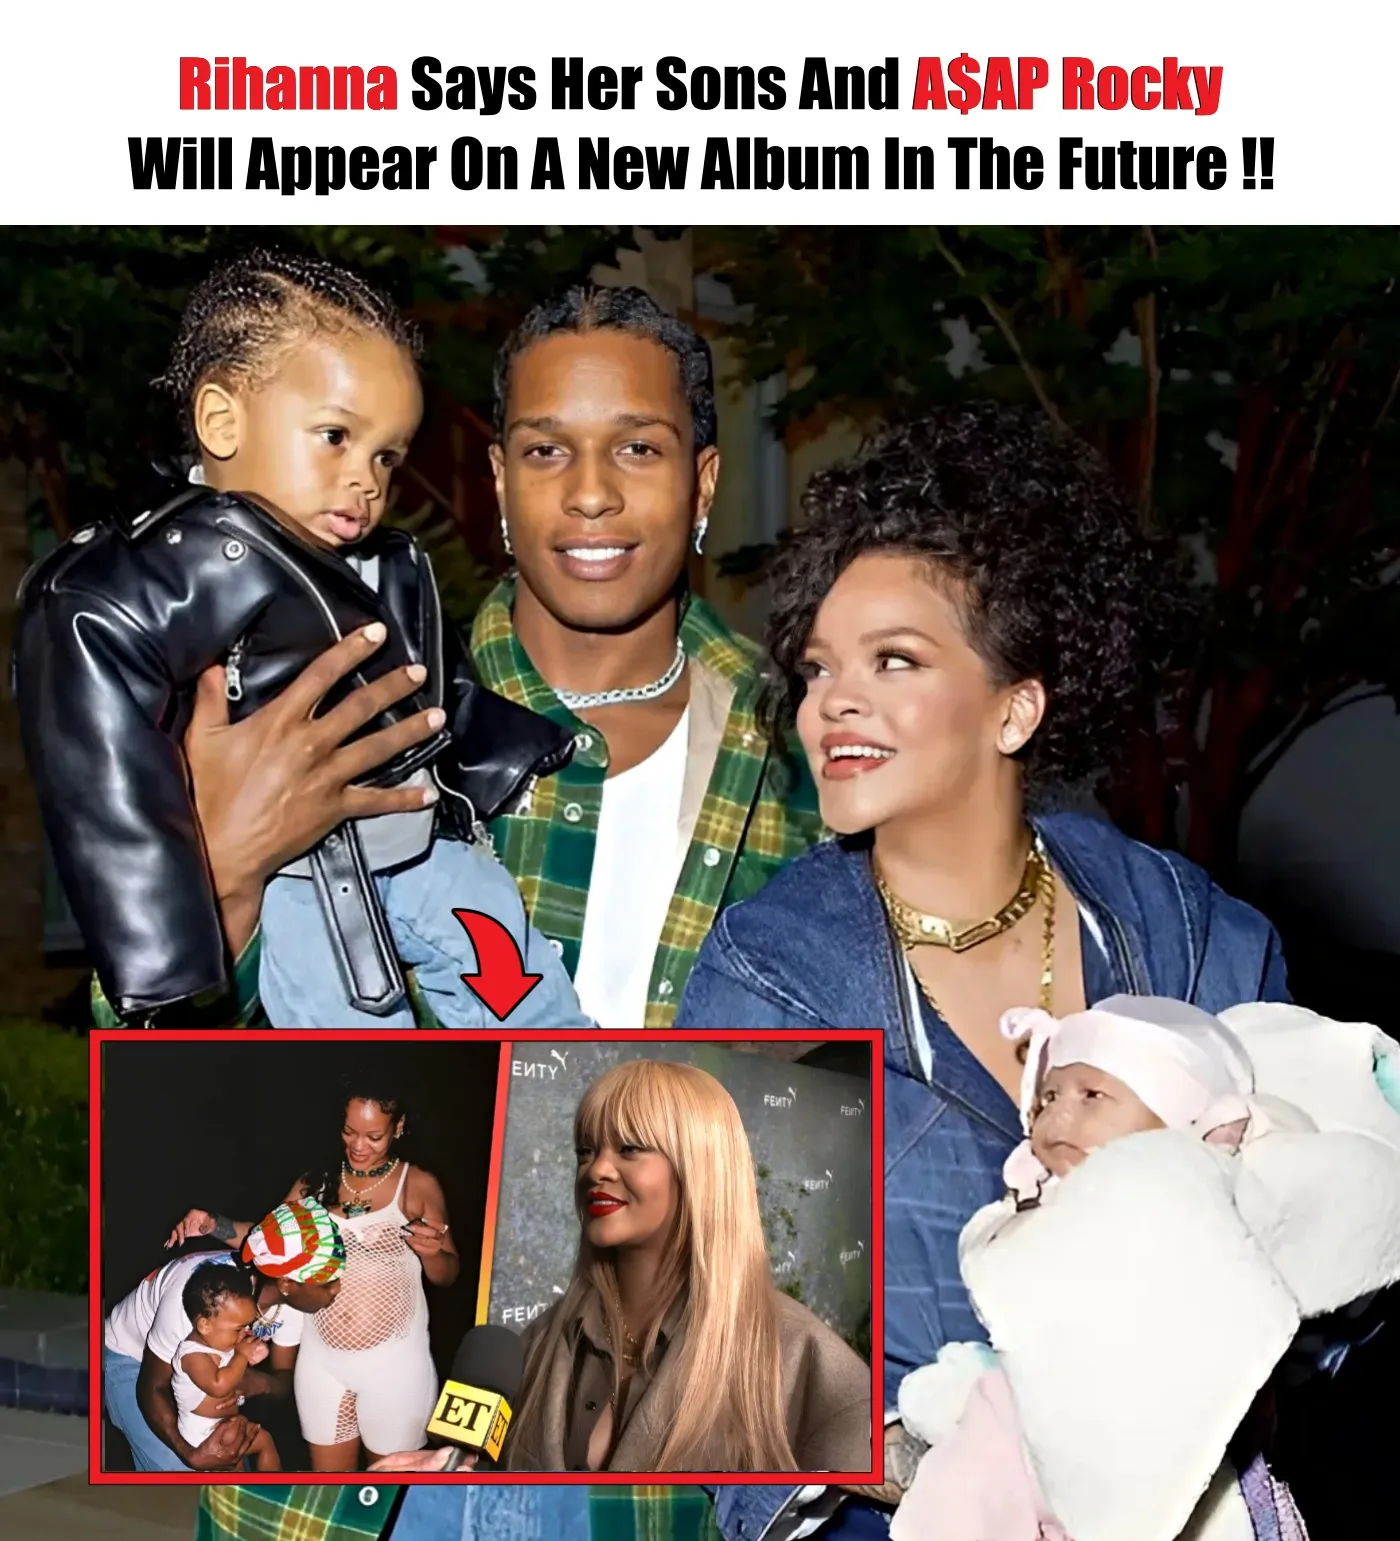 Cover Image for HOT: Rihanna Says Her Sons And A$AP Rocky Will Appear On A New Album In The Future !!